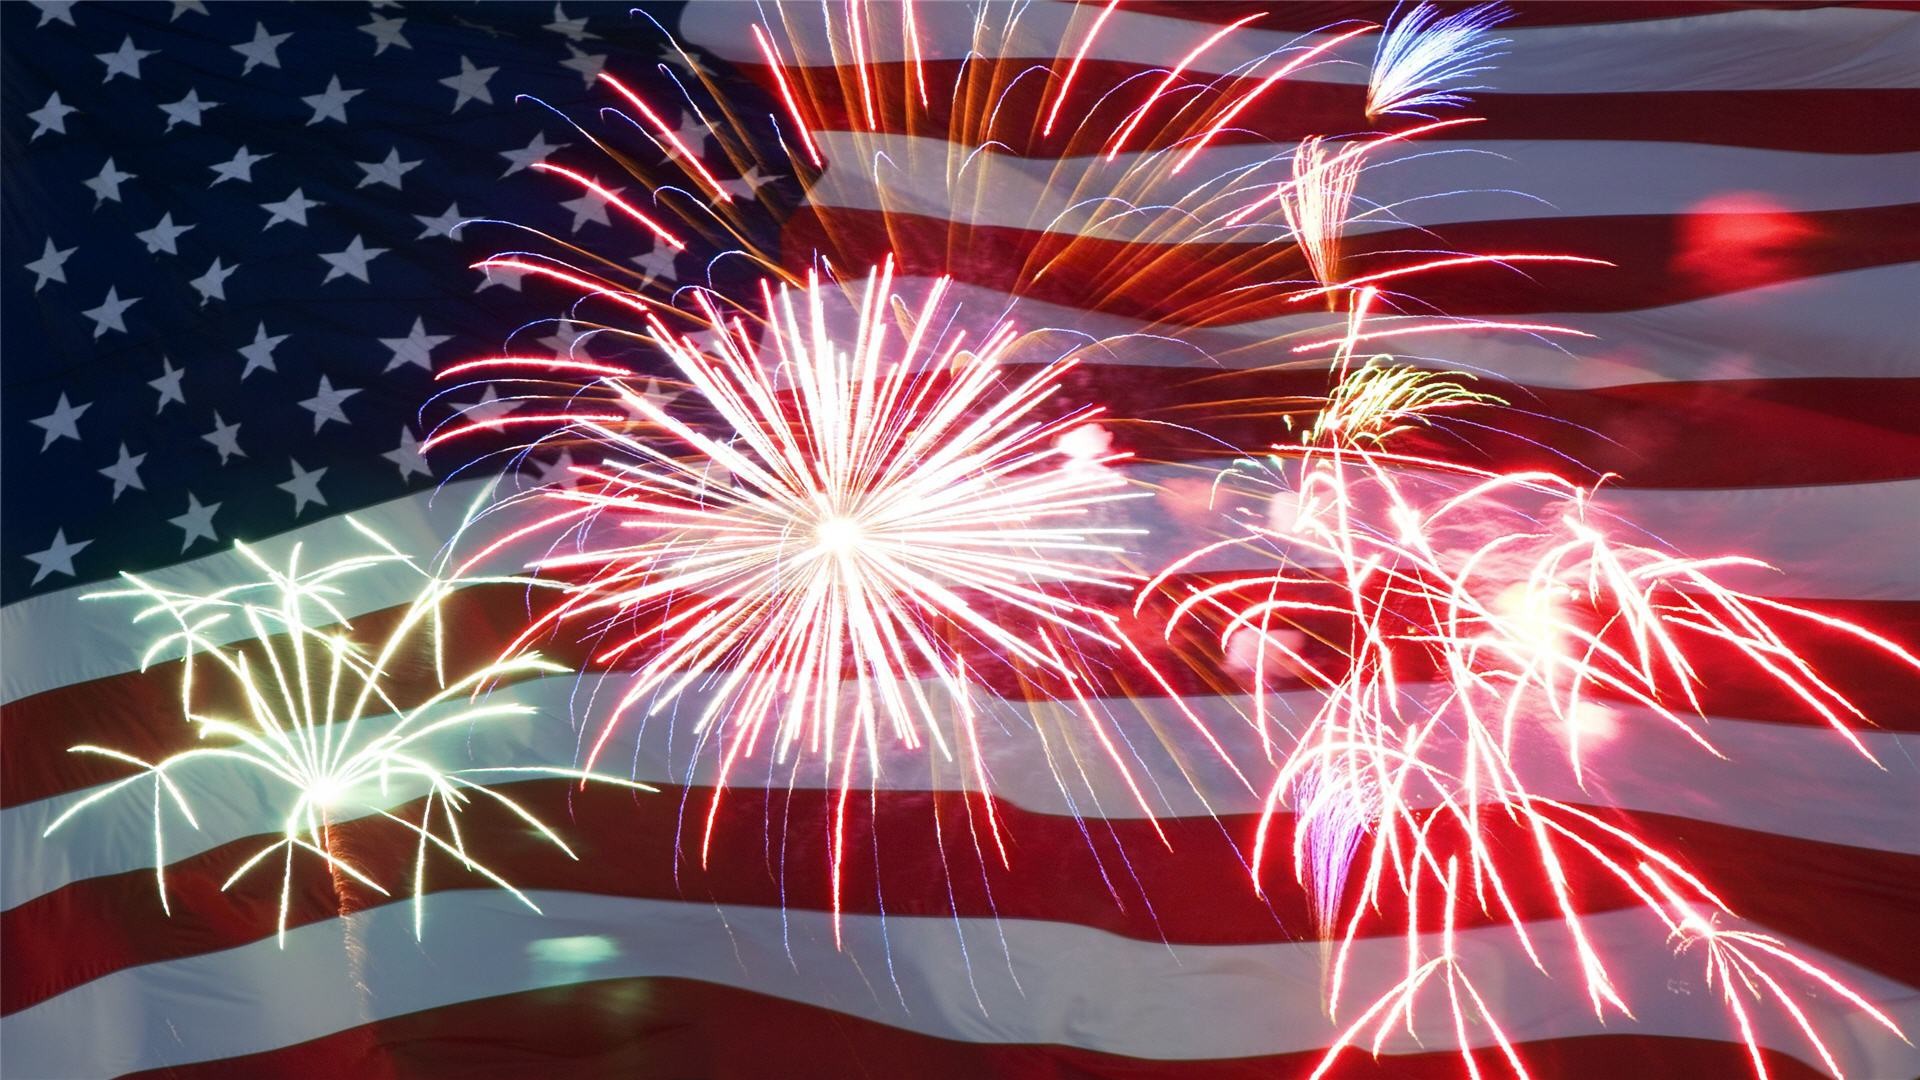 1920x1080 4Th Of July Fireworks wallpaper 884132 